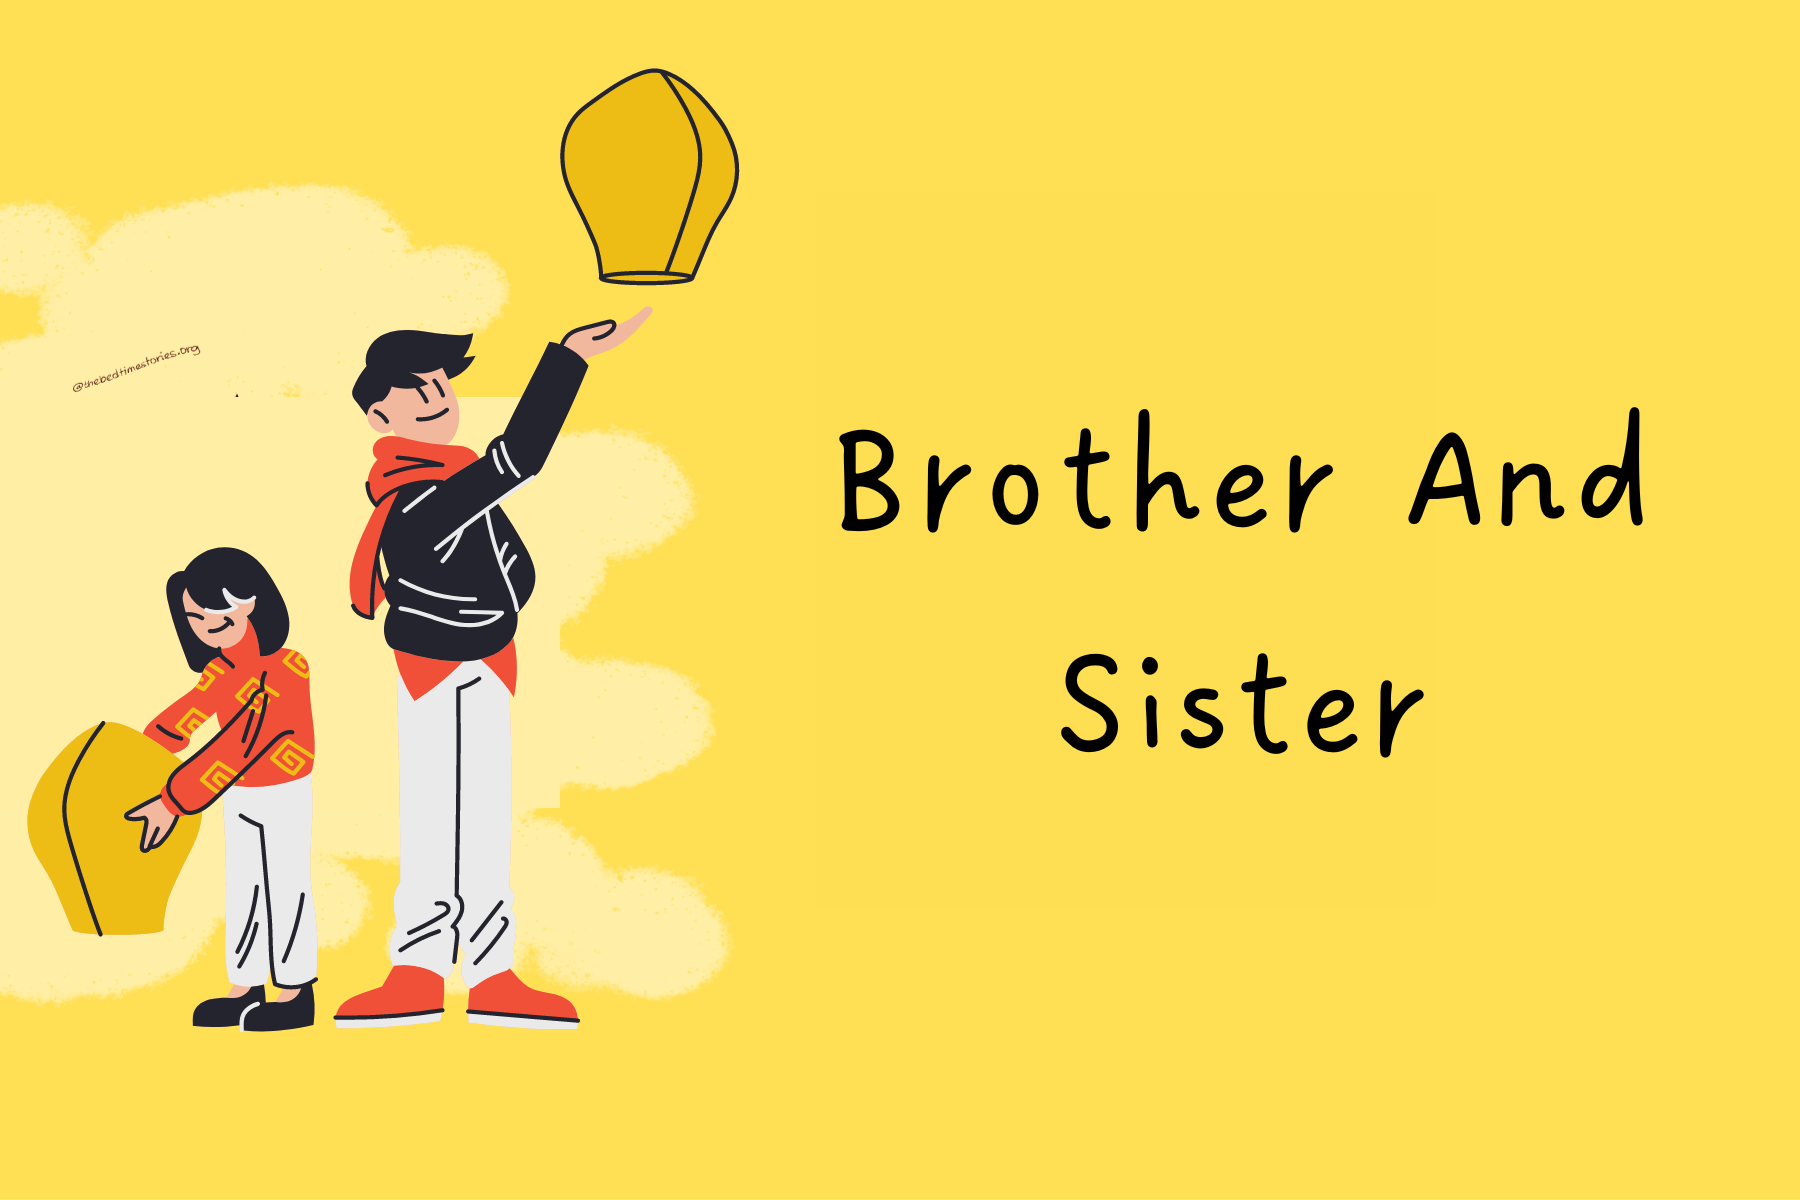 Brother And Sister: 10 Best Short Stories Of All Time